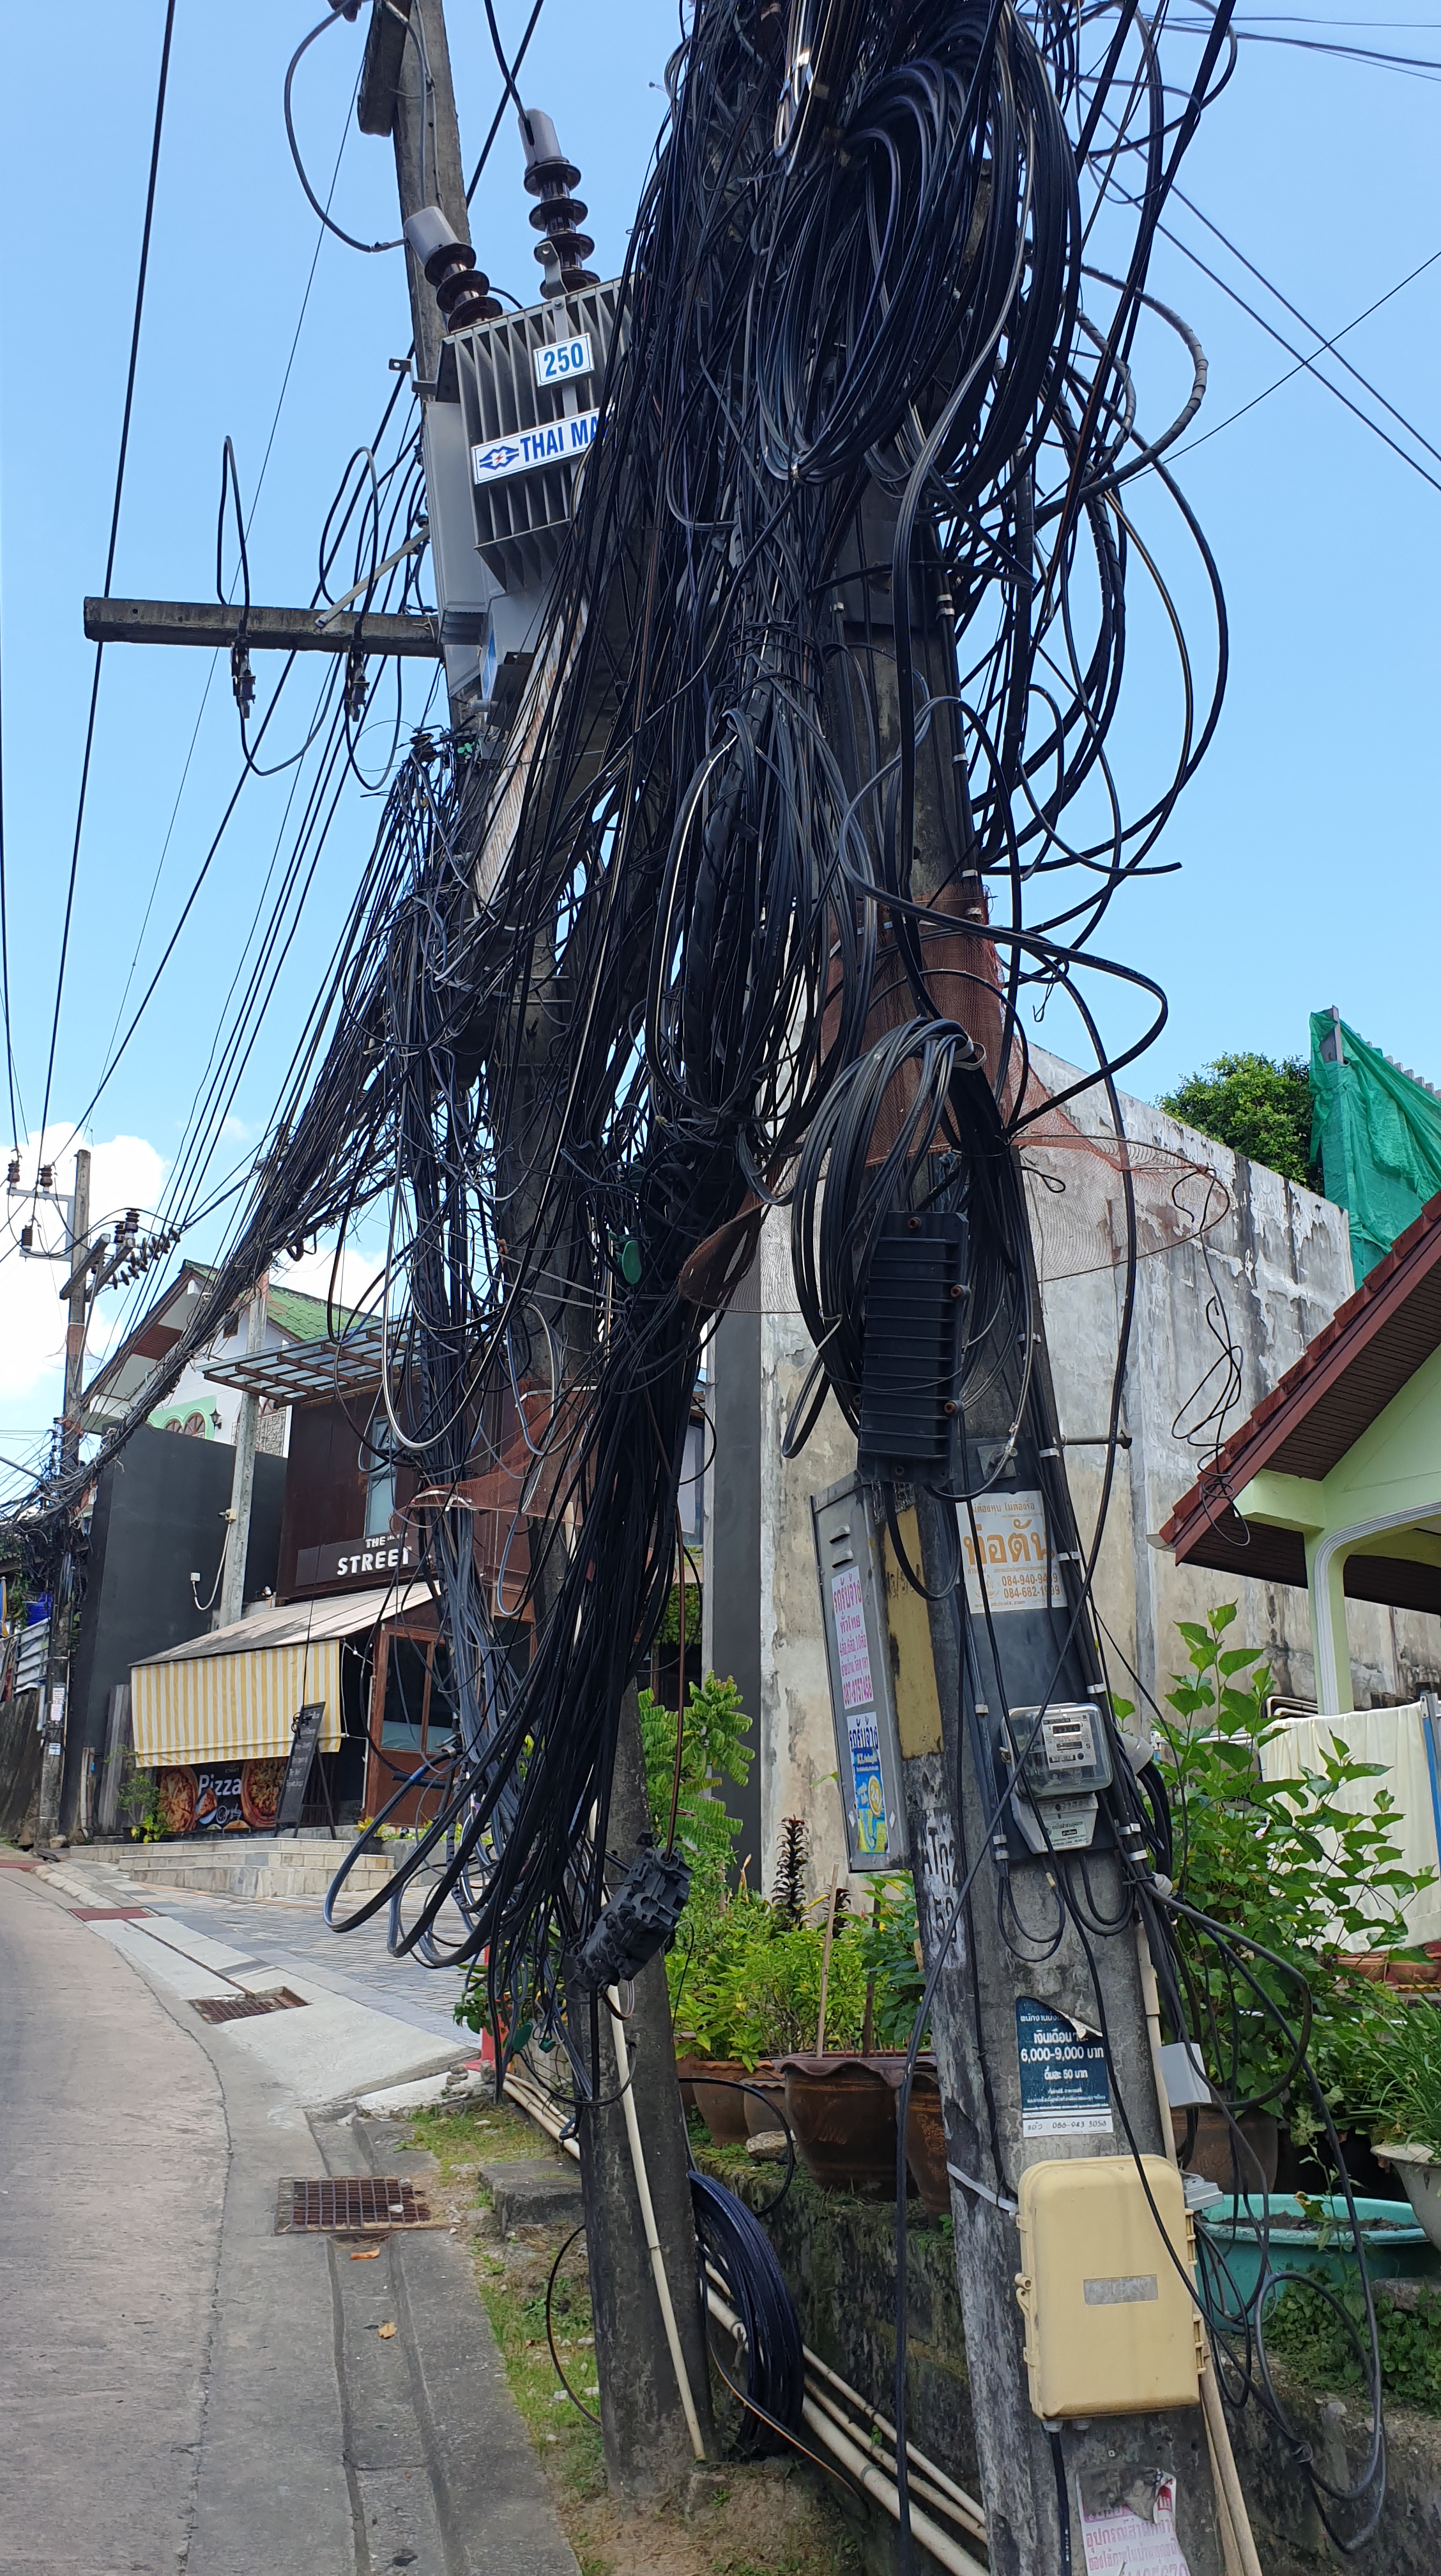 Lots of telecommunications cables hanging from pole in Thailand